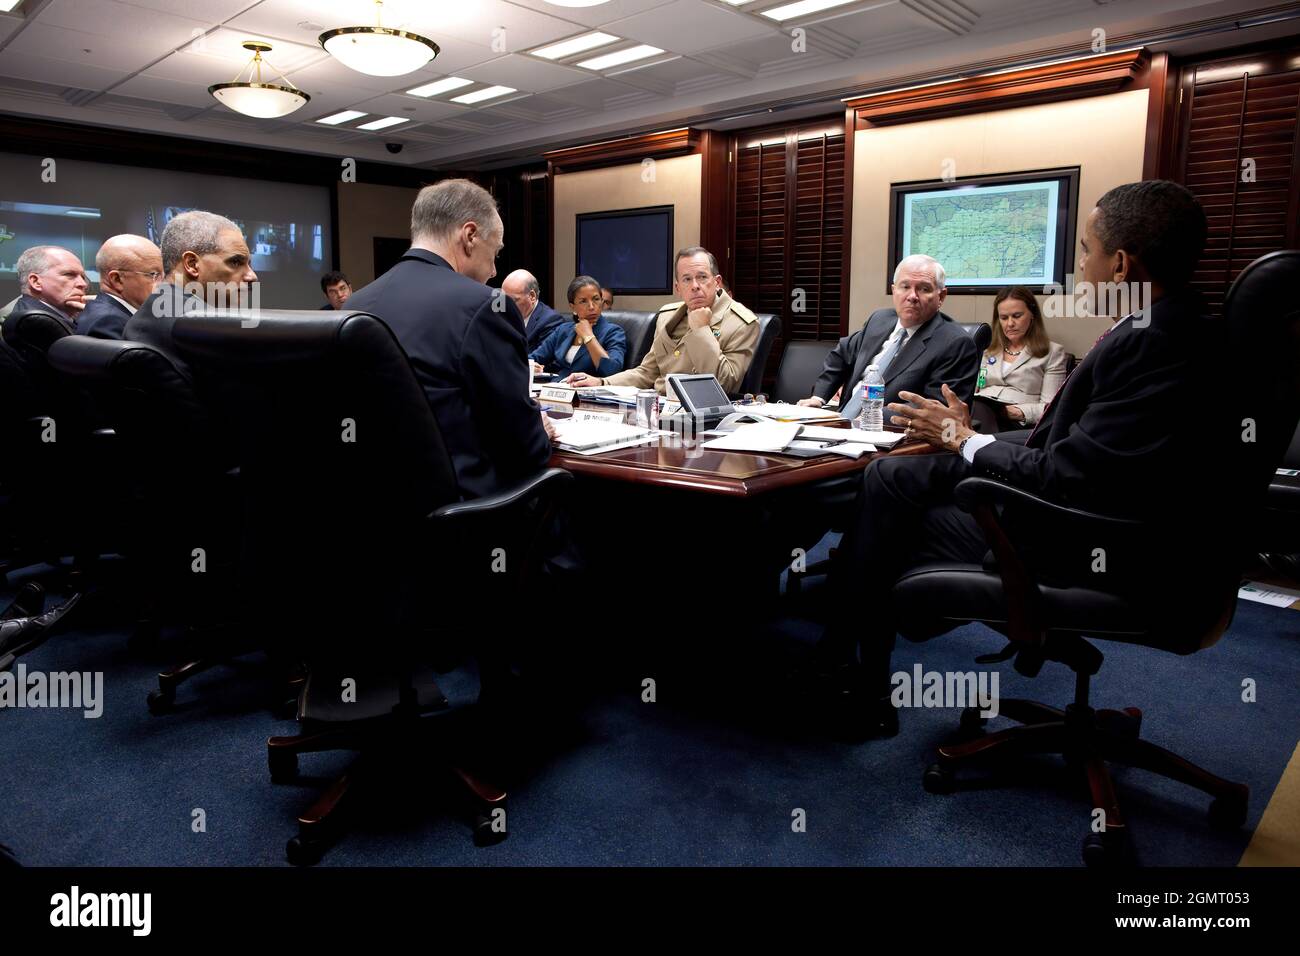 President Barack Obama meets with his national security team on Afghanistan and Pakistan in the Situation Room of the White House, April 25, 2011. Pictured clockwise from the President are: National Security Advisor Tom Donilon; Attorney General Eric Holder; Director of National Intelligence James Clapper; John Brennan, Assistant to the President for Homeland Security and Counterterrorism; Neal Wolin, Deputy Secretary of the Treasury; Chief of Staff Bill Daley; Susan Rice, U.S. Permanent Representative to the United Nations; Admiral Michael Mullen, Chairman, Joint Chiefs of Staff; Defense Secr Stock Photo